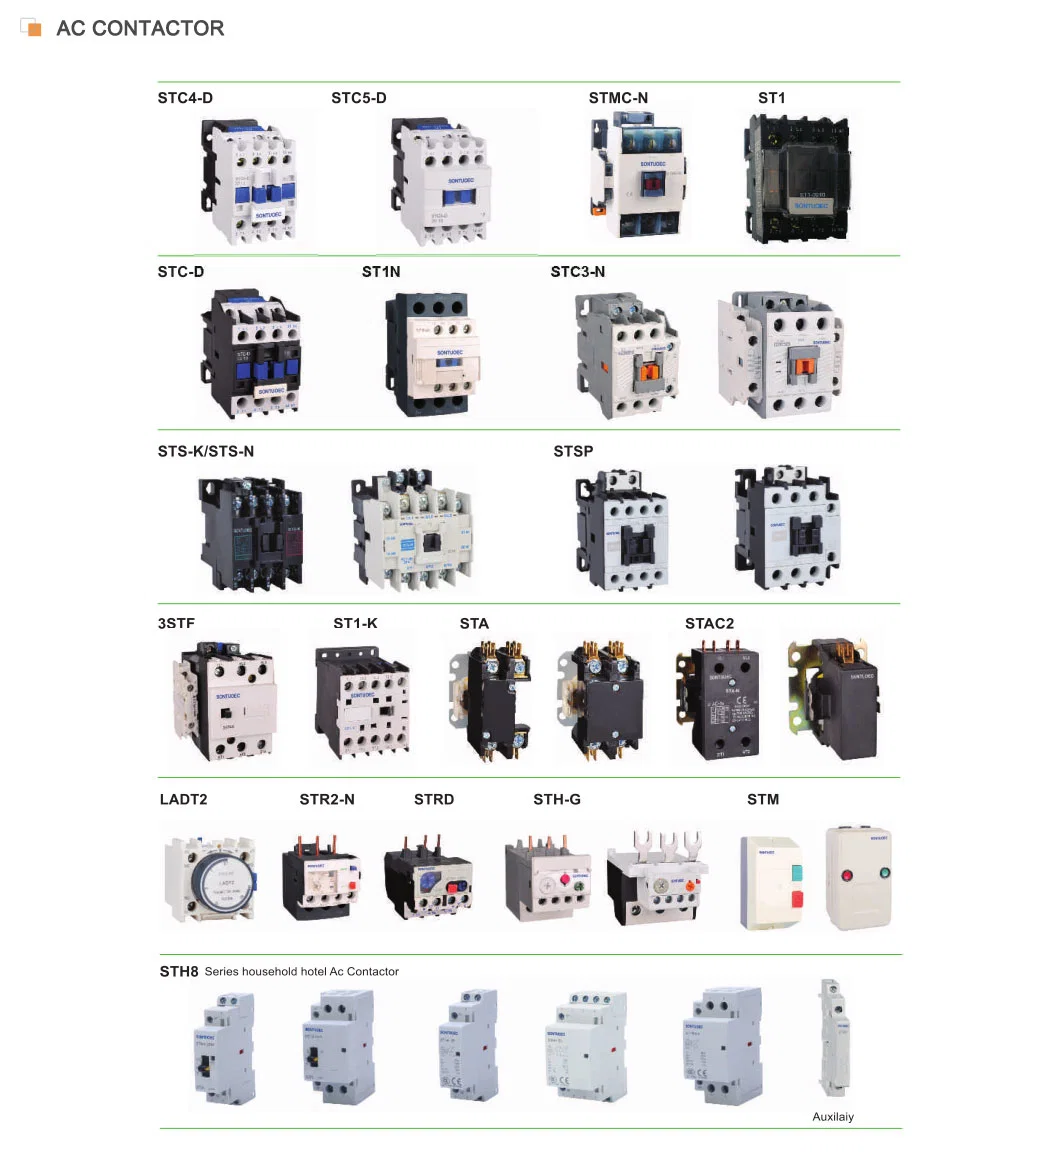 Sontuoec Stc2-L Series AC Contactor 3p 220V Magnetic or Electrical Contactor